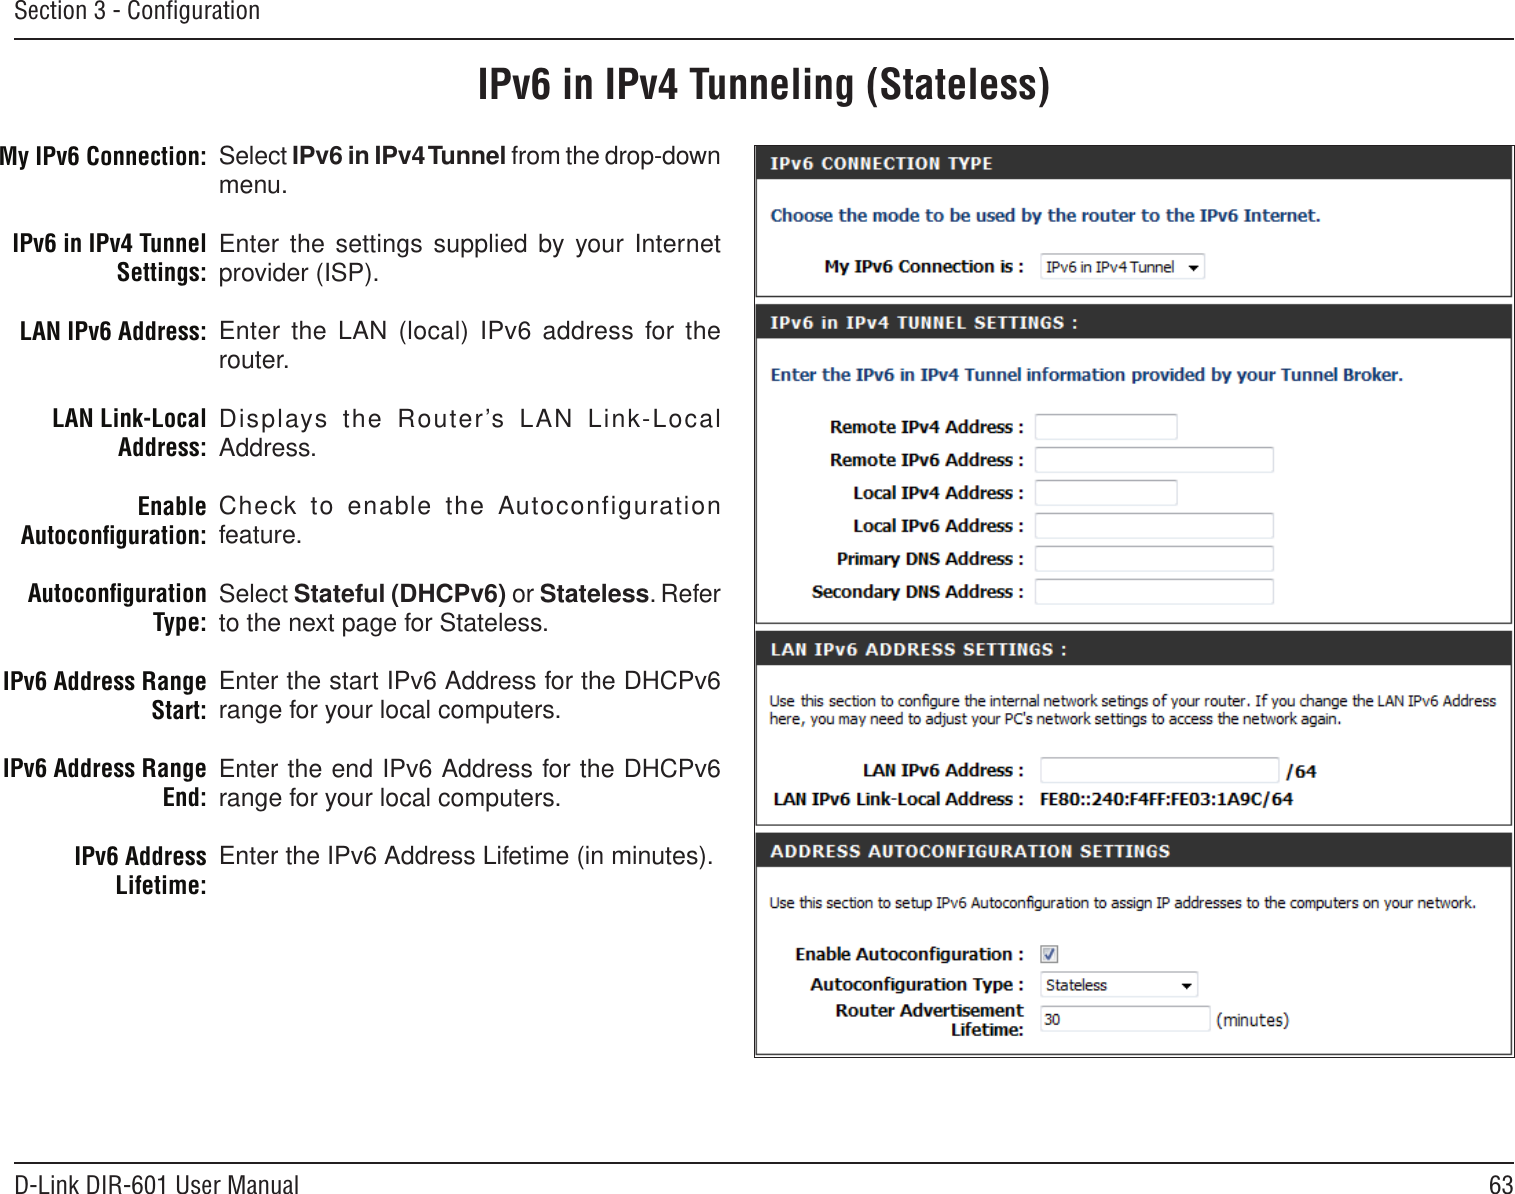 63D-Link DIR-601 User ManualSection 3 - ConﬁgurationIPv6 in IPv4 Tunneling (Stateless)Select IPv6 in IPv4 Tunnel from the drop-down menu.Enter the settings supplied by your Internet provider (ISP). Enter  the  LAN (local)  IPv6  address  for the router. Displays  the  Router’s  LAN  Link-Local Address.Check to  enable the Autoconfiguration feature.Select Stateful (DHCPv6) or Stateless. Refer to the next page for Stateless.Enter the start IPv6 Address for the DHCPv6 range for your local computers.Enter the end IPv6 Address for the DHCPv6 range for your local computers.Enter the IPv6 Address Lifetime (in minutes).My IPv6 Connection:IPv6 in IPv4 Tunnel Settings:LAN IPv6 Address:LAN Link-Local Address:Enable Autoconﬁguration:Autoconﬁguration Type:IPv6 Address Range Start:IPv6 Address Range End:IPv6 Address Lifetime: